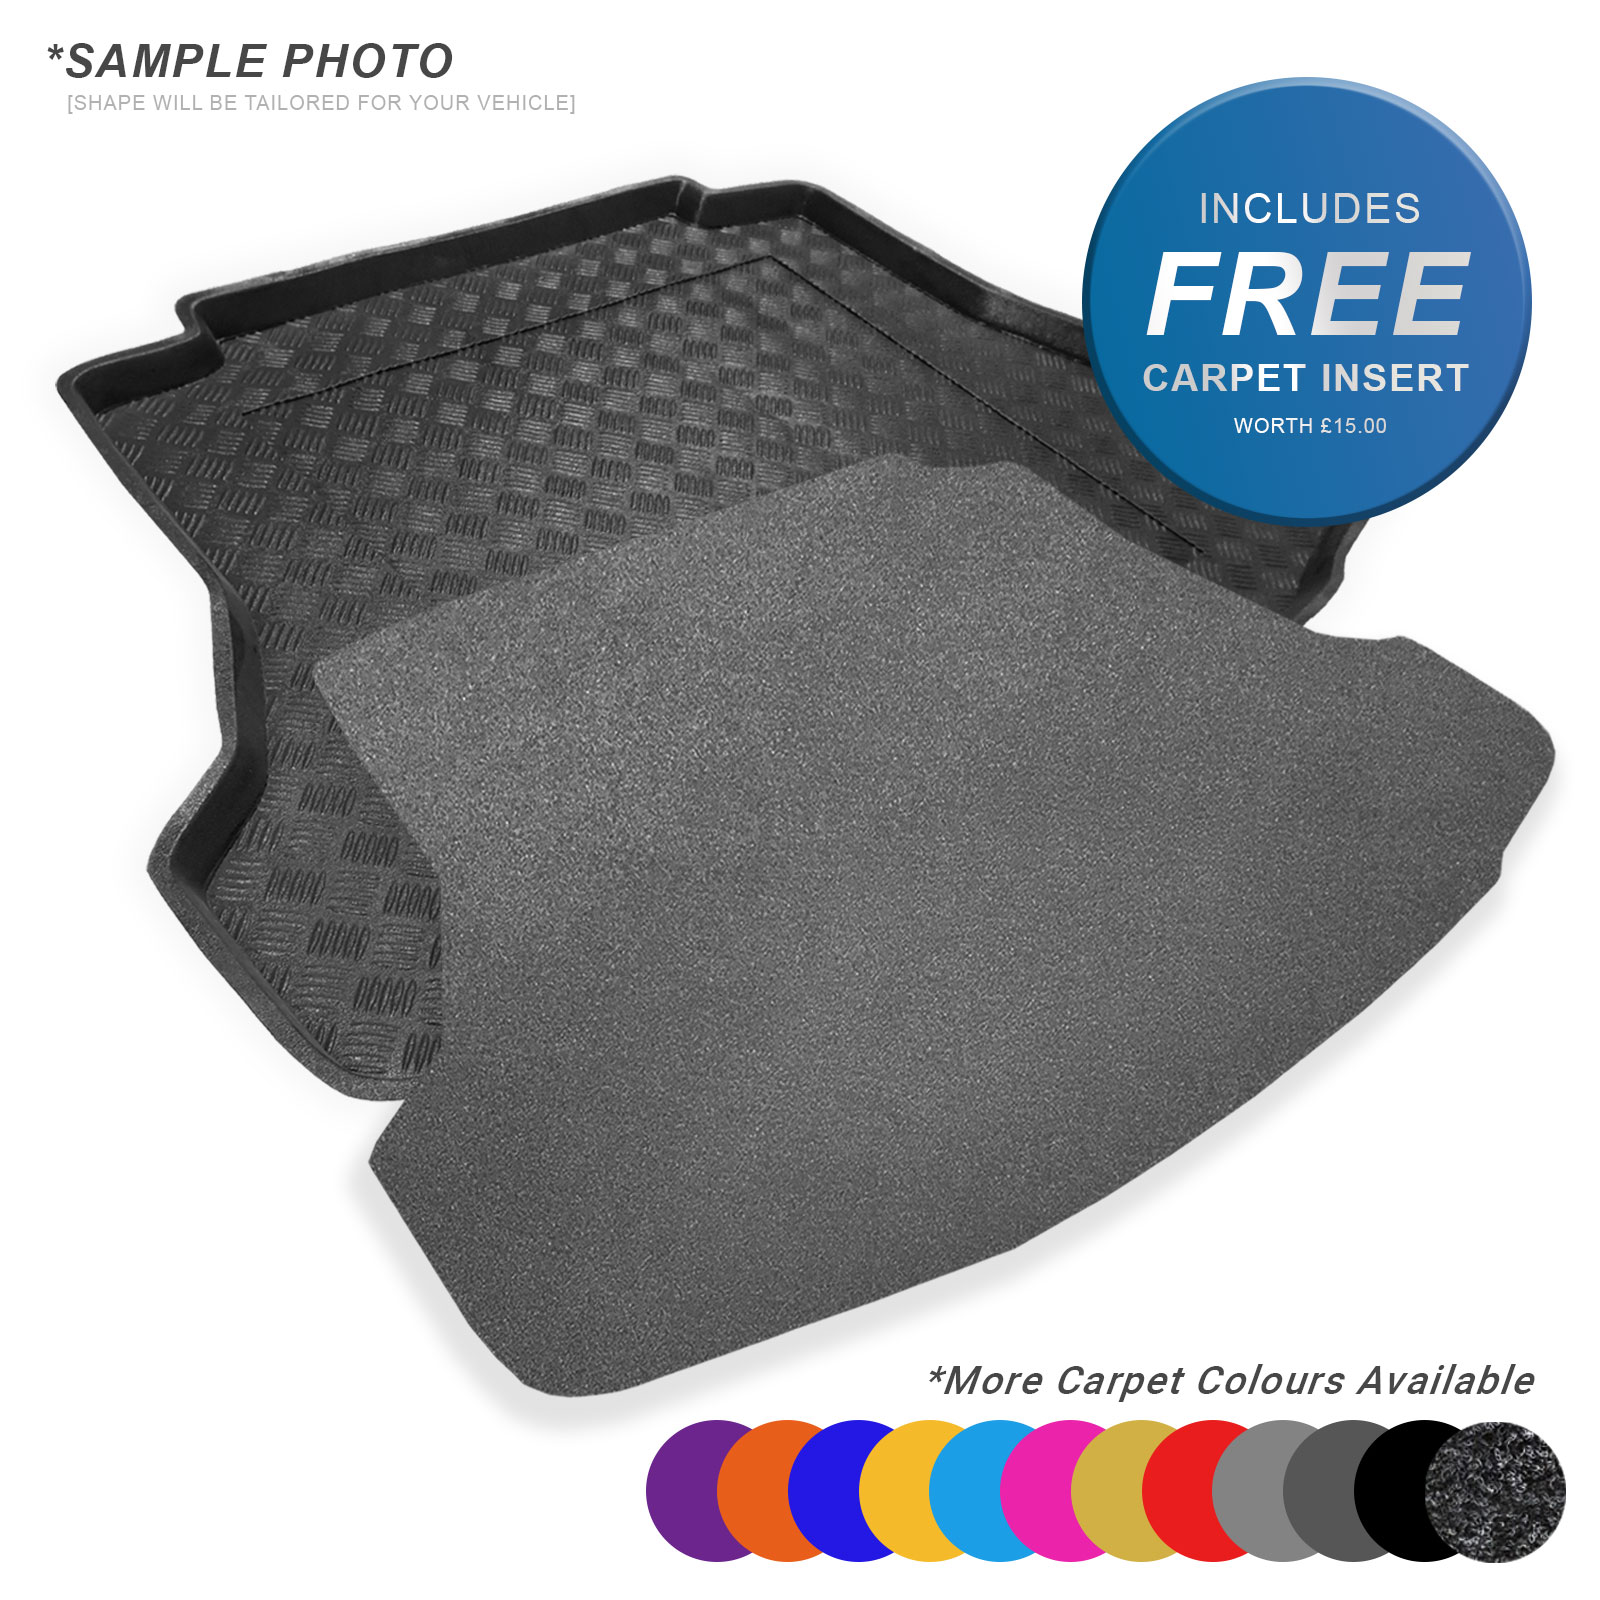 CARMATS4U.COM i30 Fastback 2019 Fully Tailored PVC Boot Liner/Tray FREE Anthracite Carpet Insert